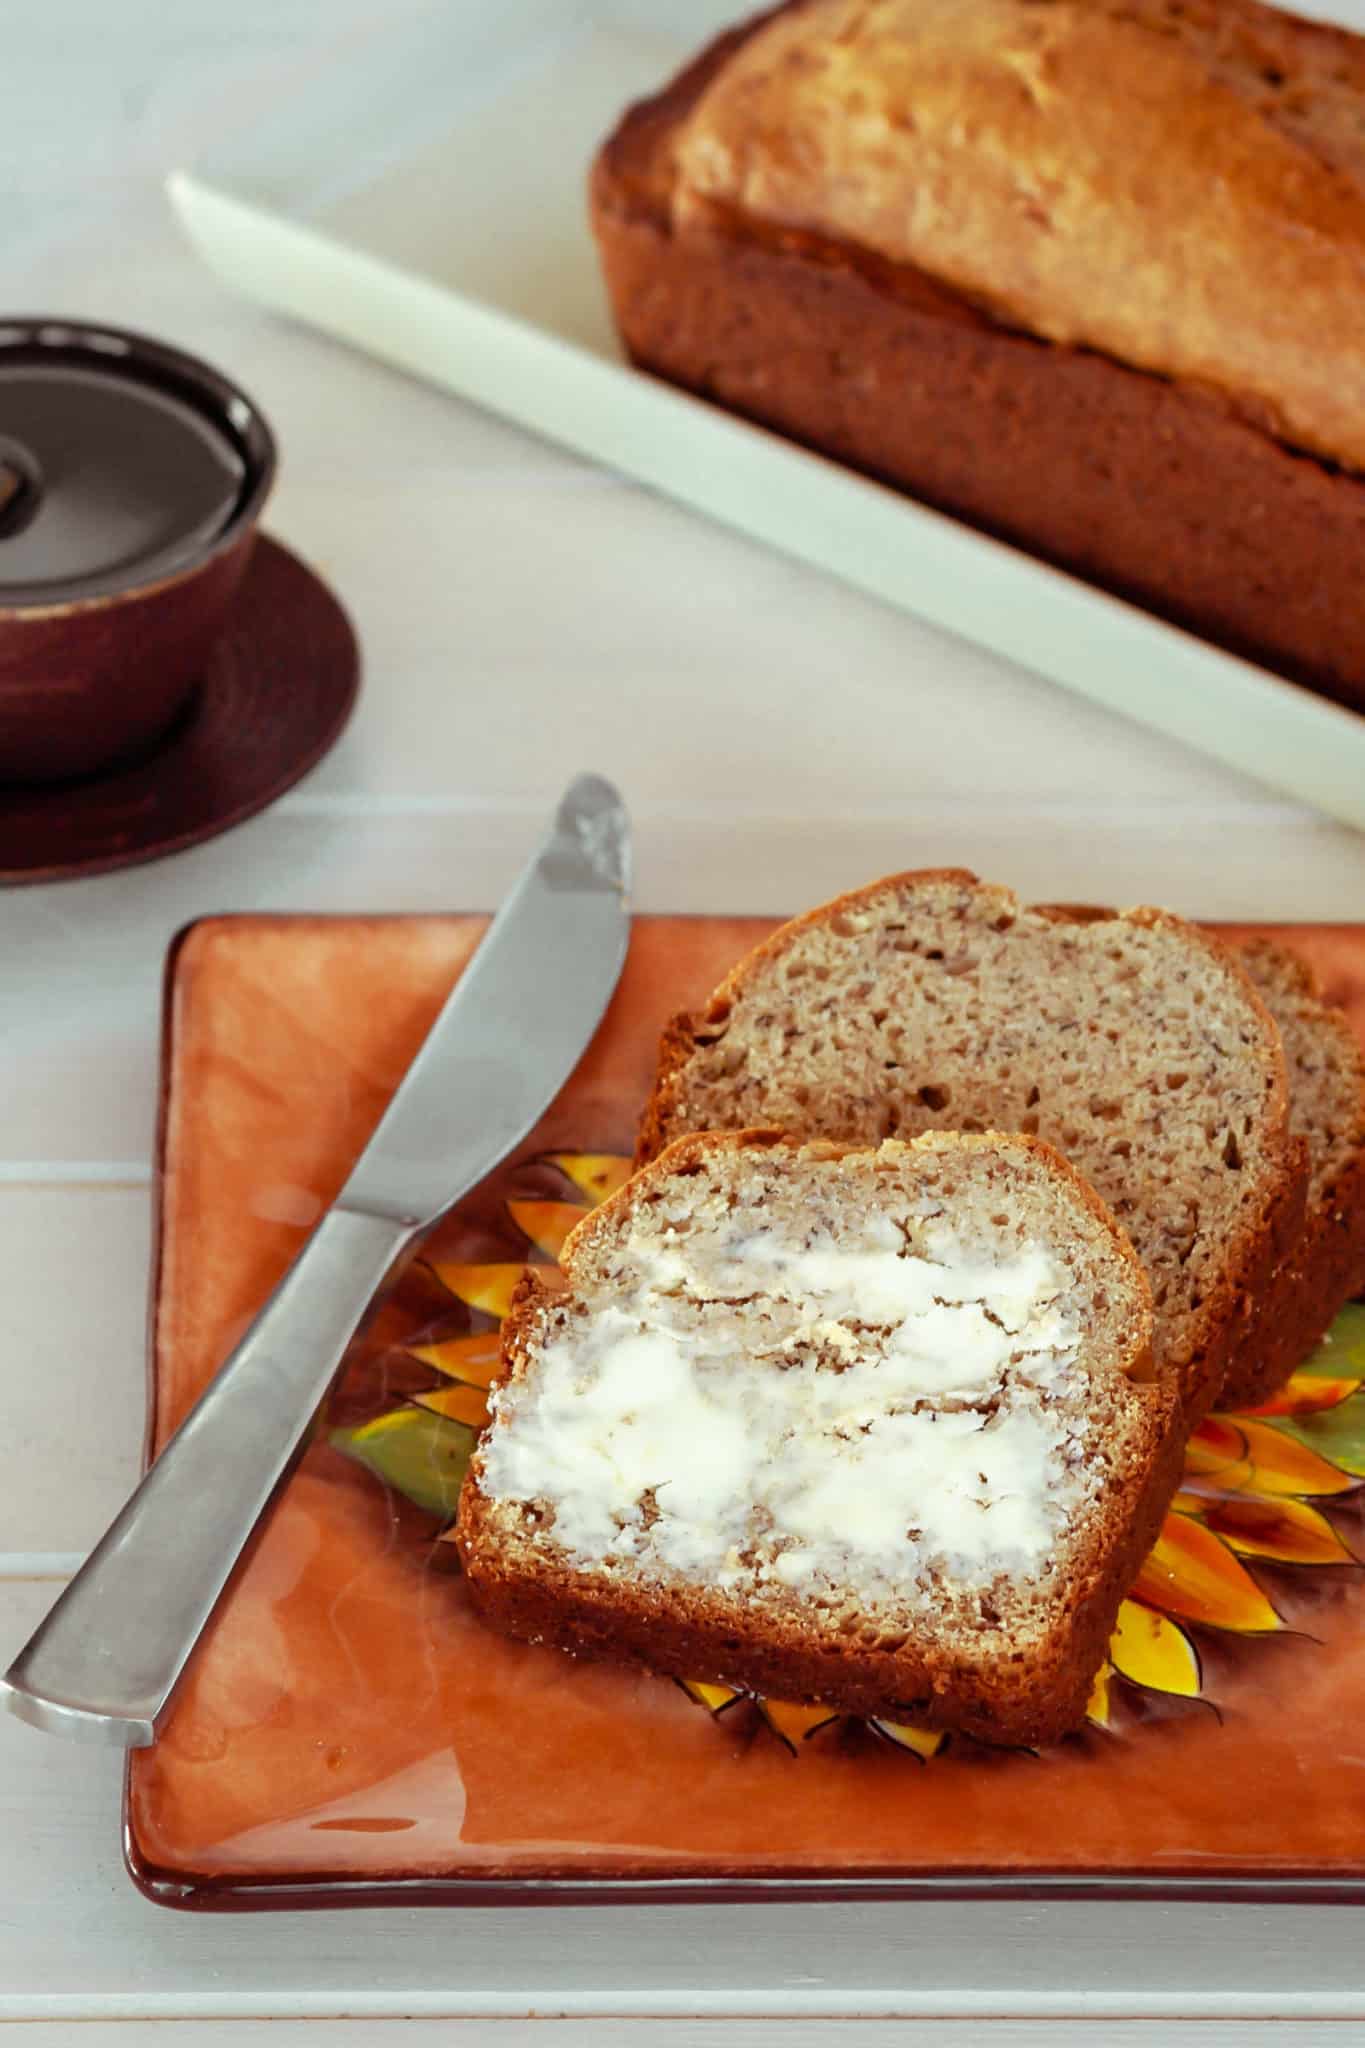 Delicious slices of banana bread topped with butter.